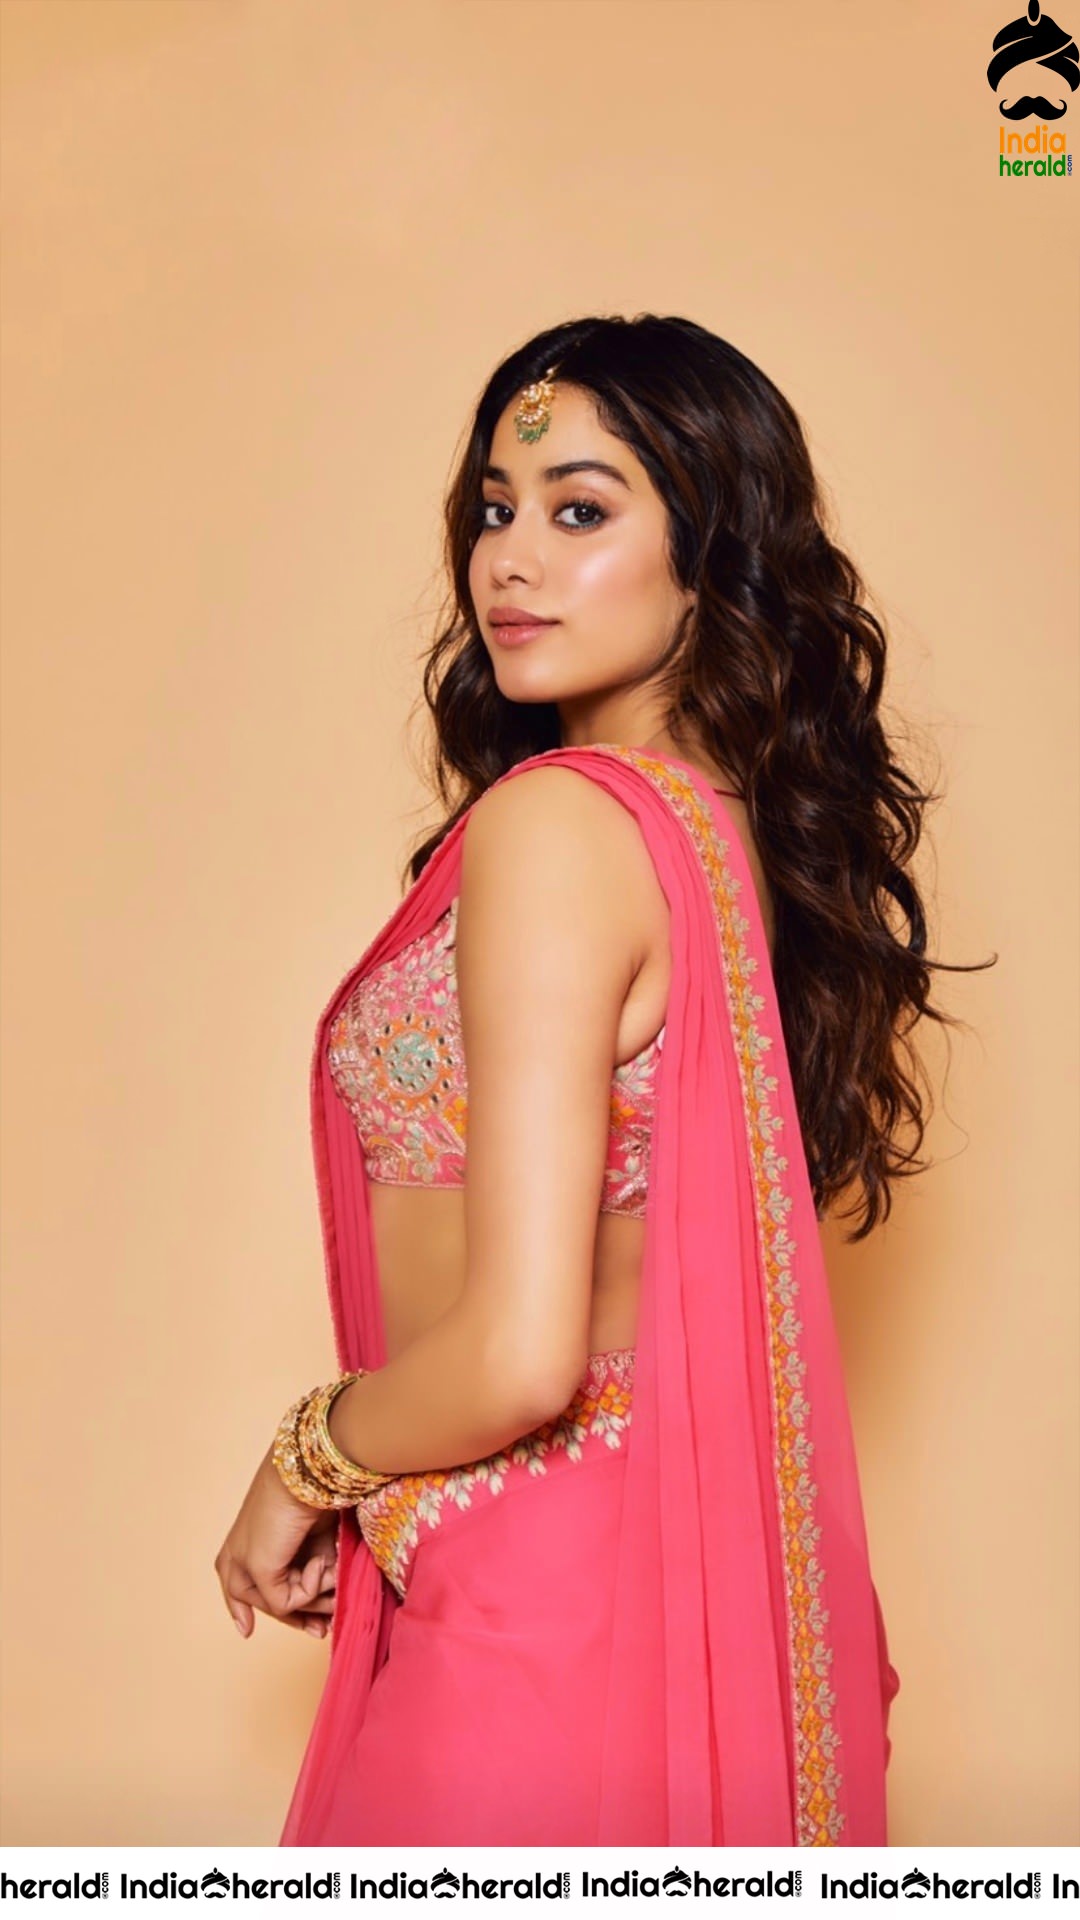 Jahnvi Kapoor Seduces and Sizzles us with Saree once again